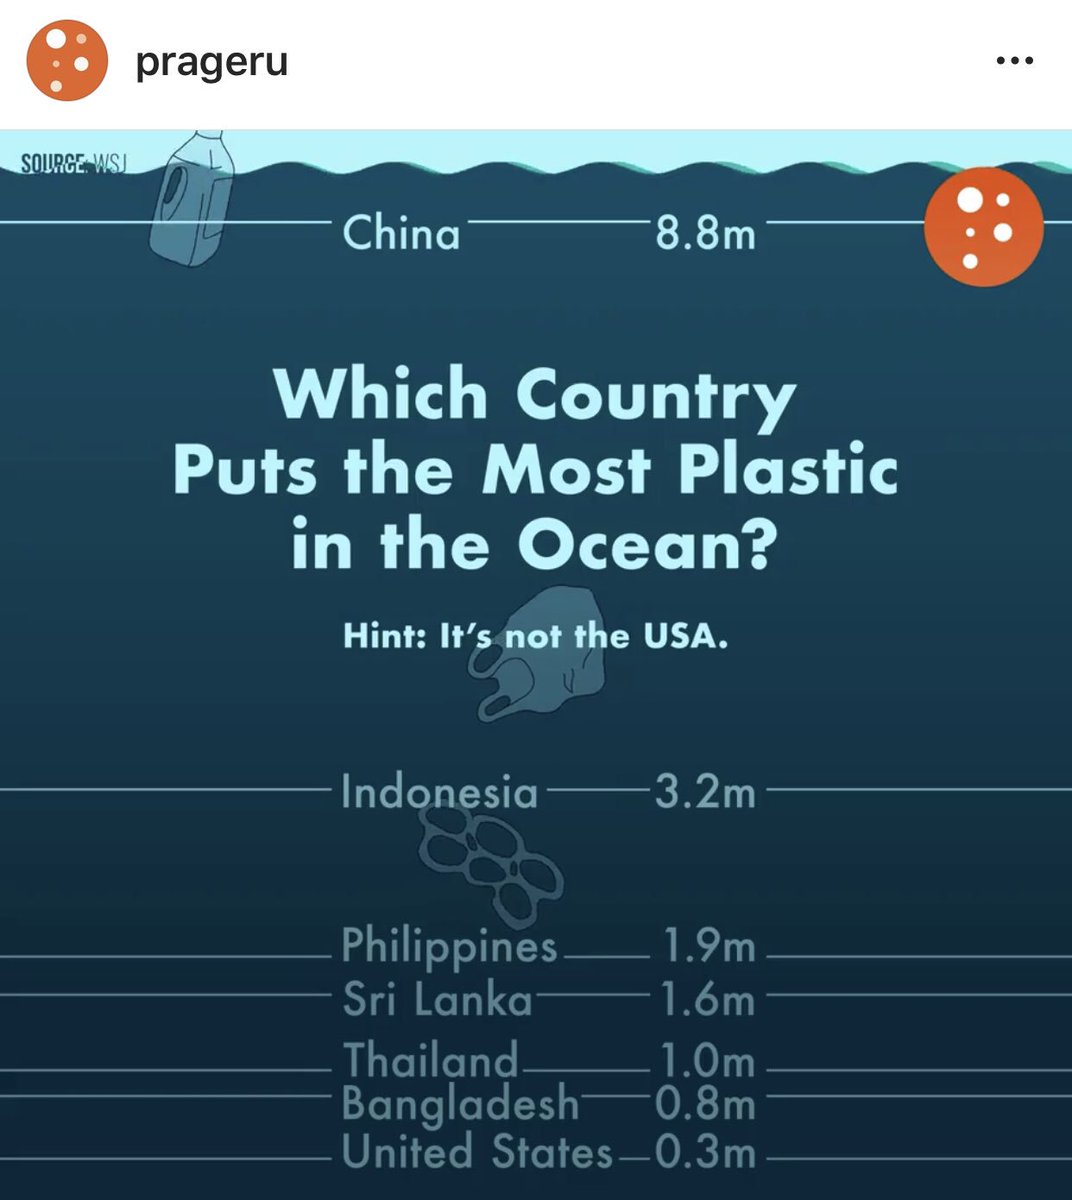 I thought it was India that was top ayhole. Boy was I mistaken. #prageru #pollutionfacts